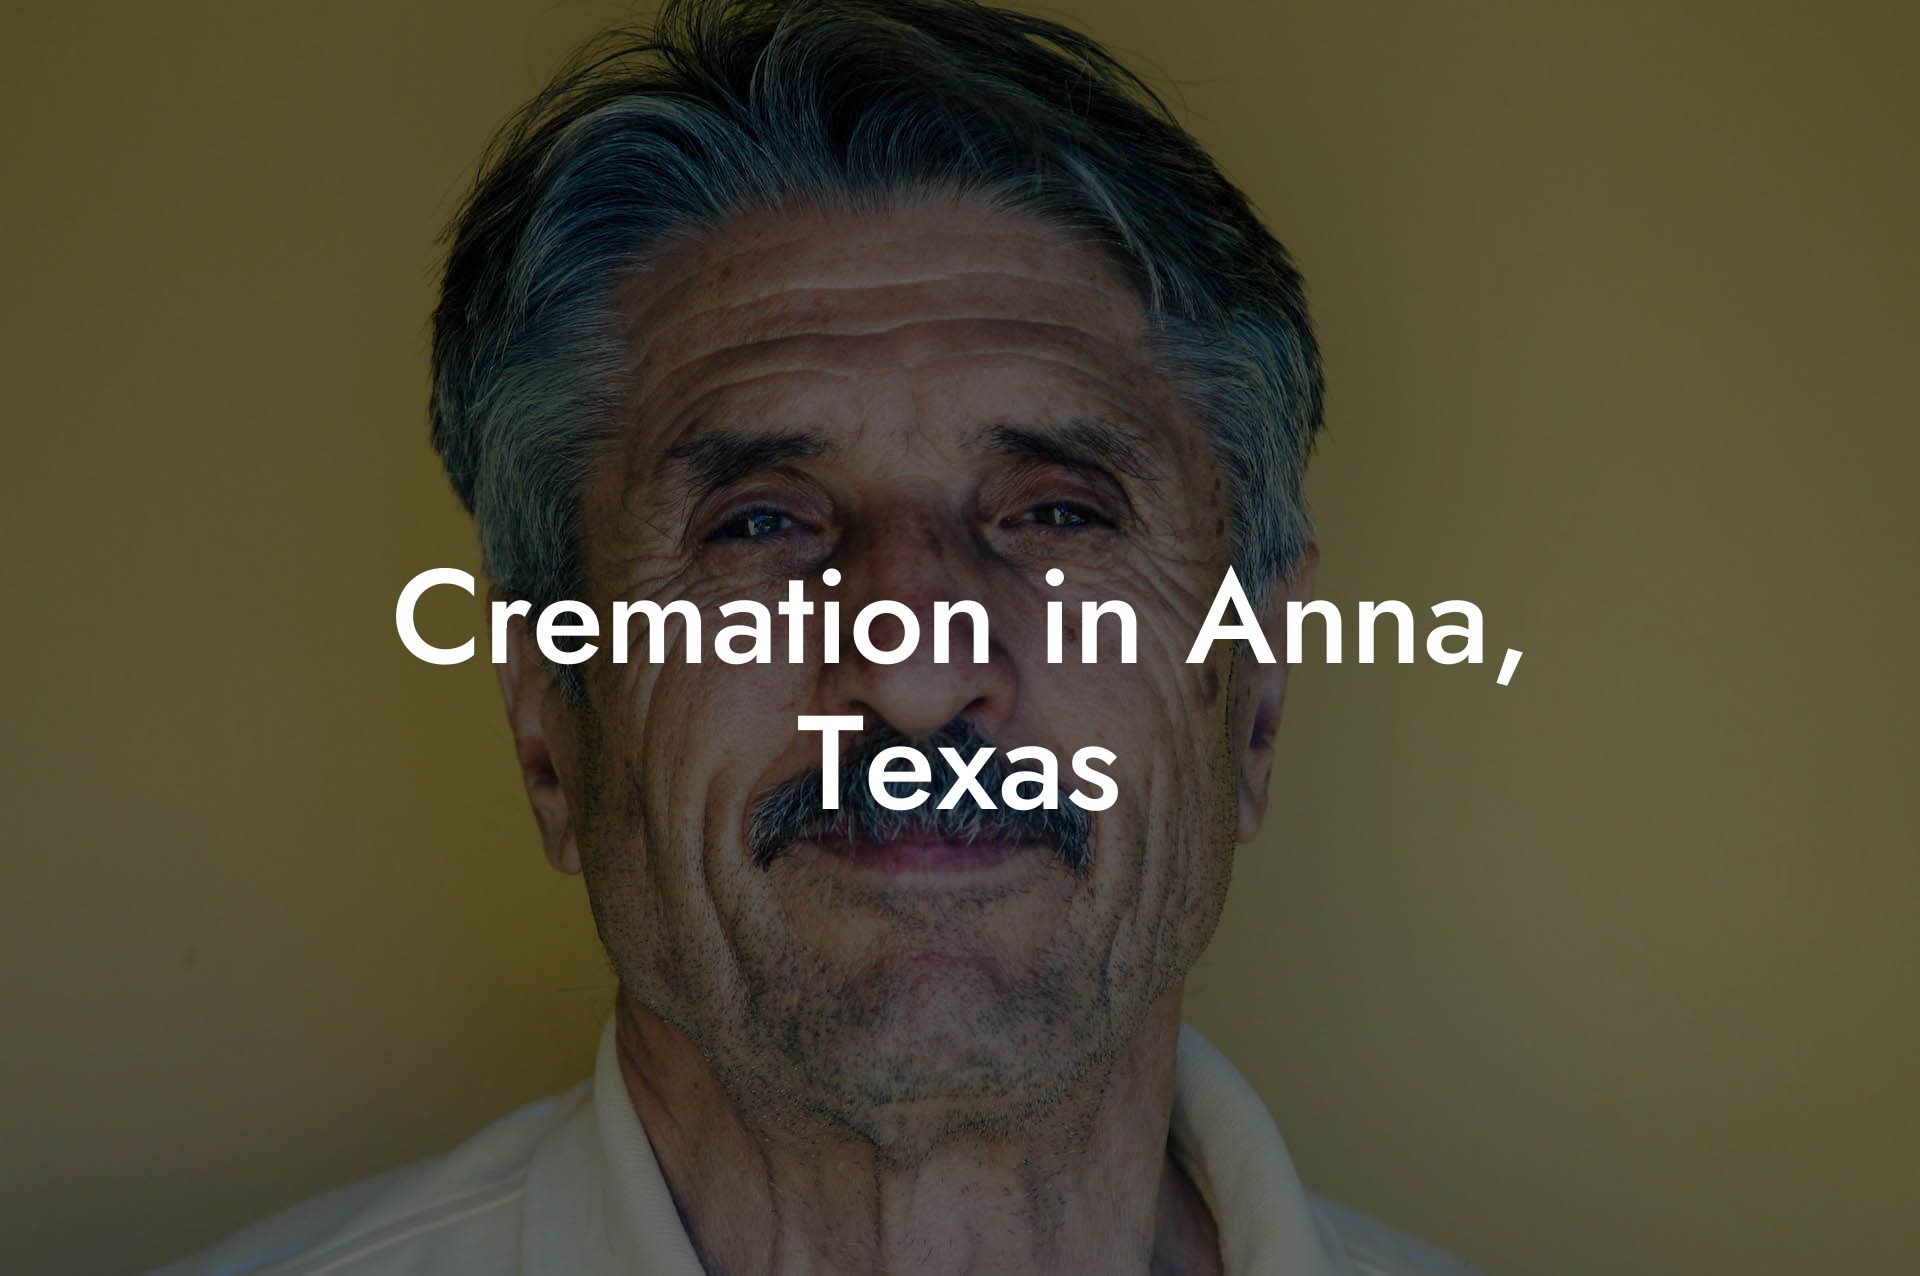 Cremation in Anna, Texas